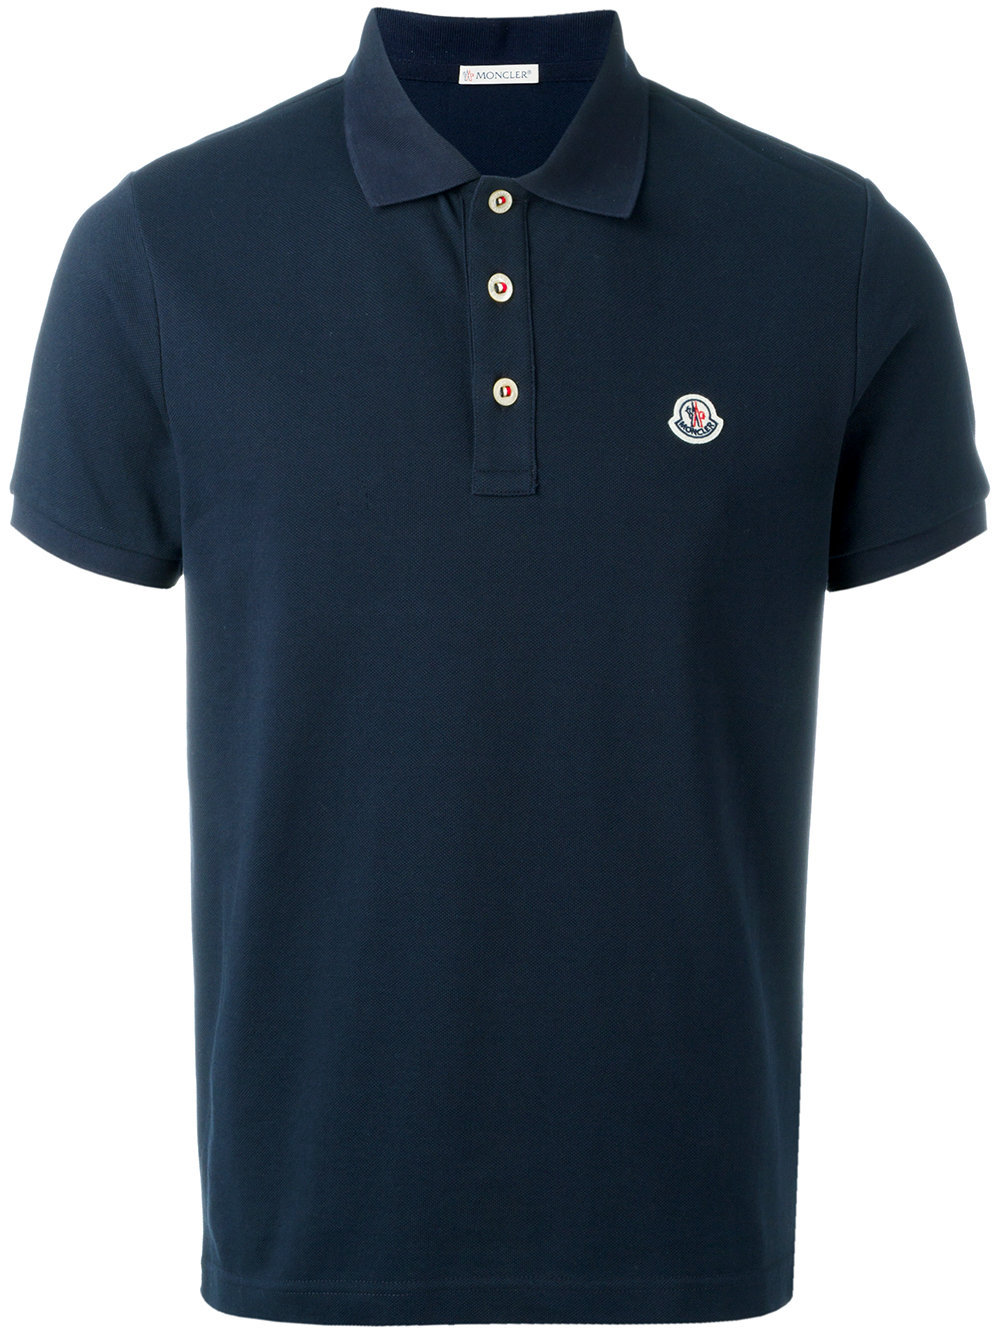 The 2019 summer cotton ball POLO shirt with intercolor collar front and floral half chest